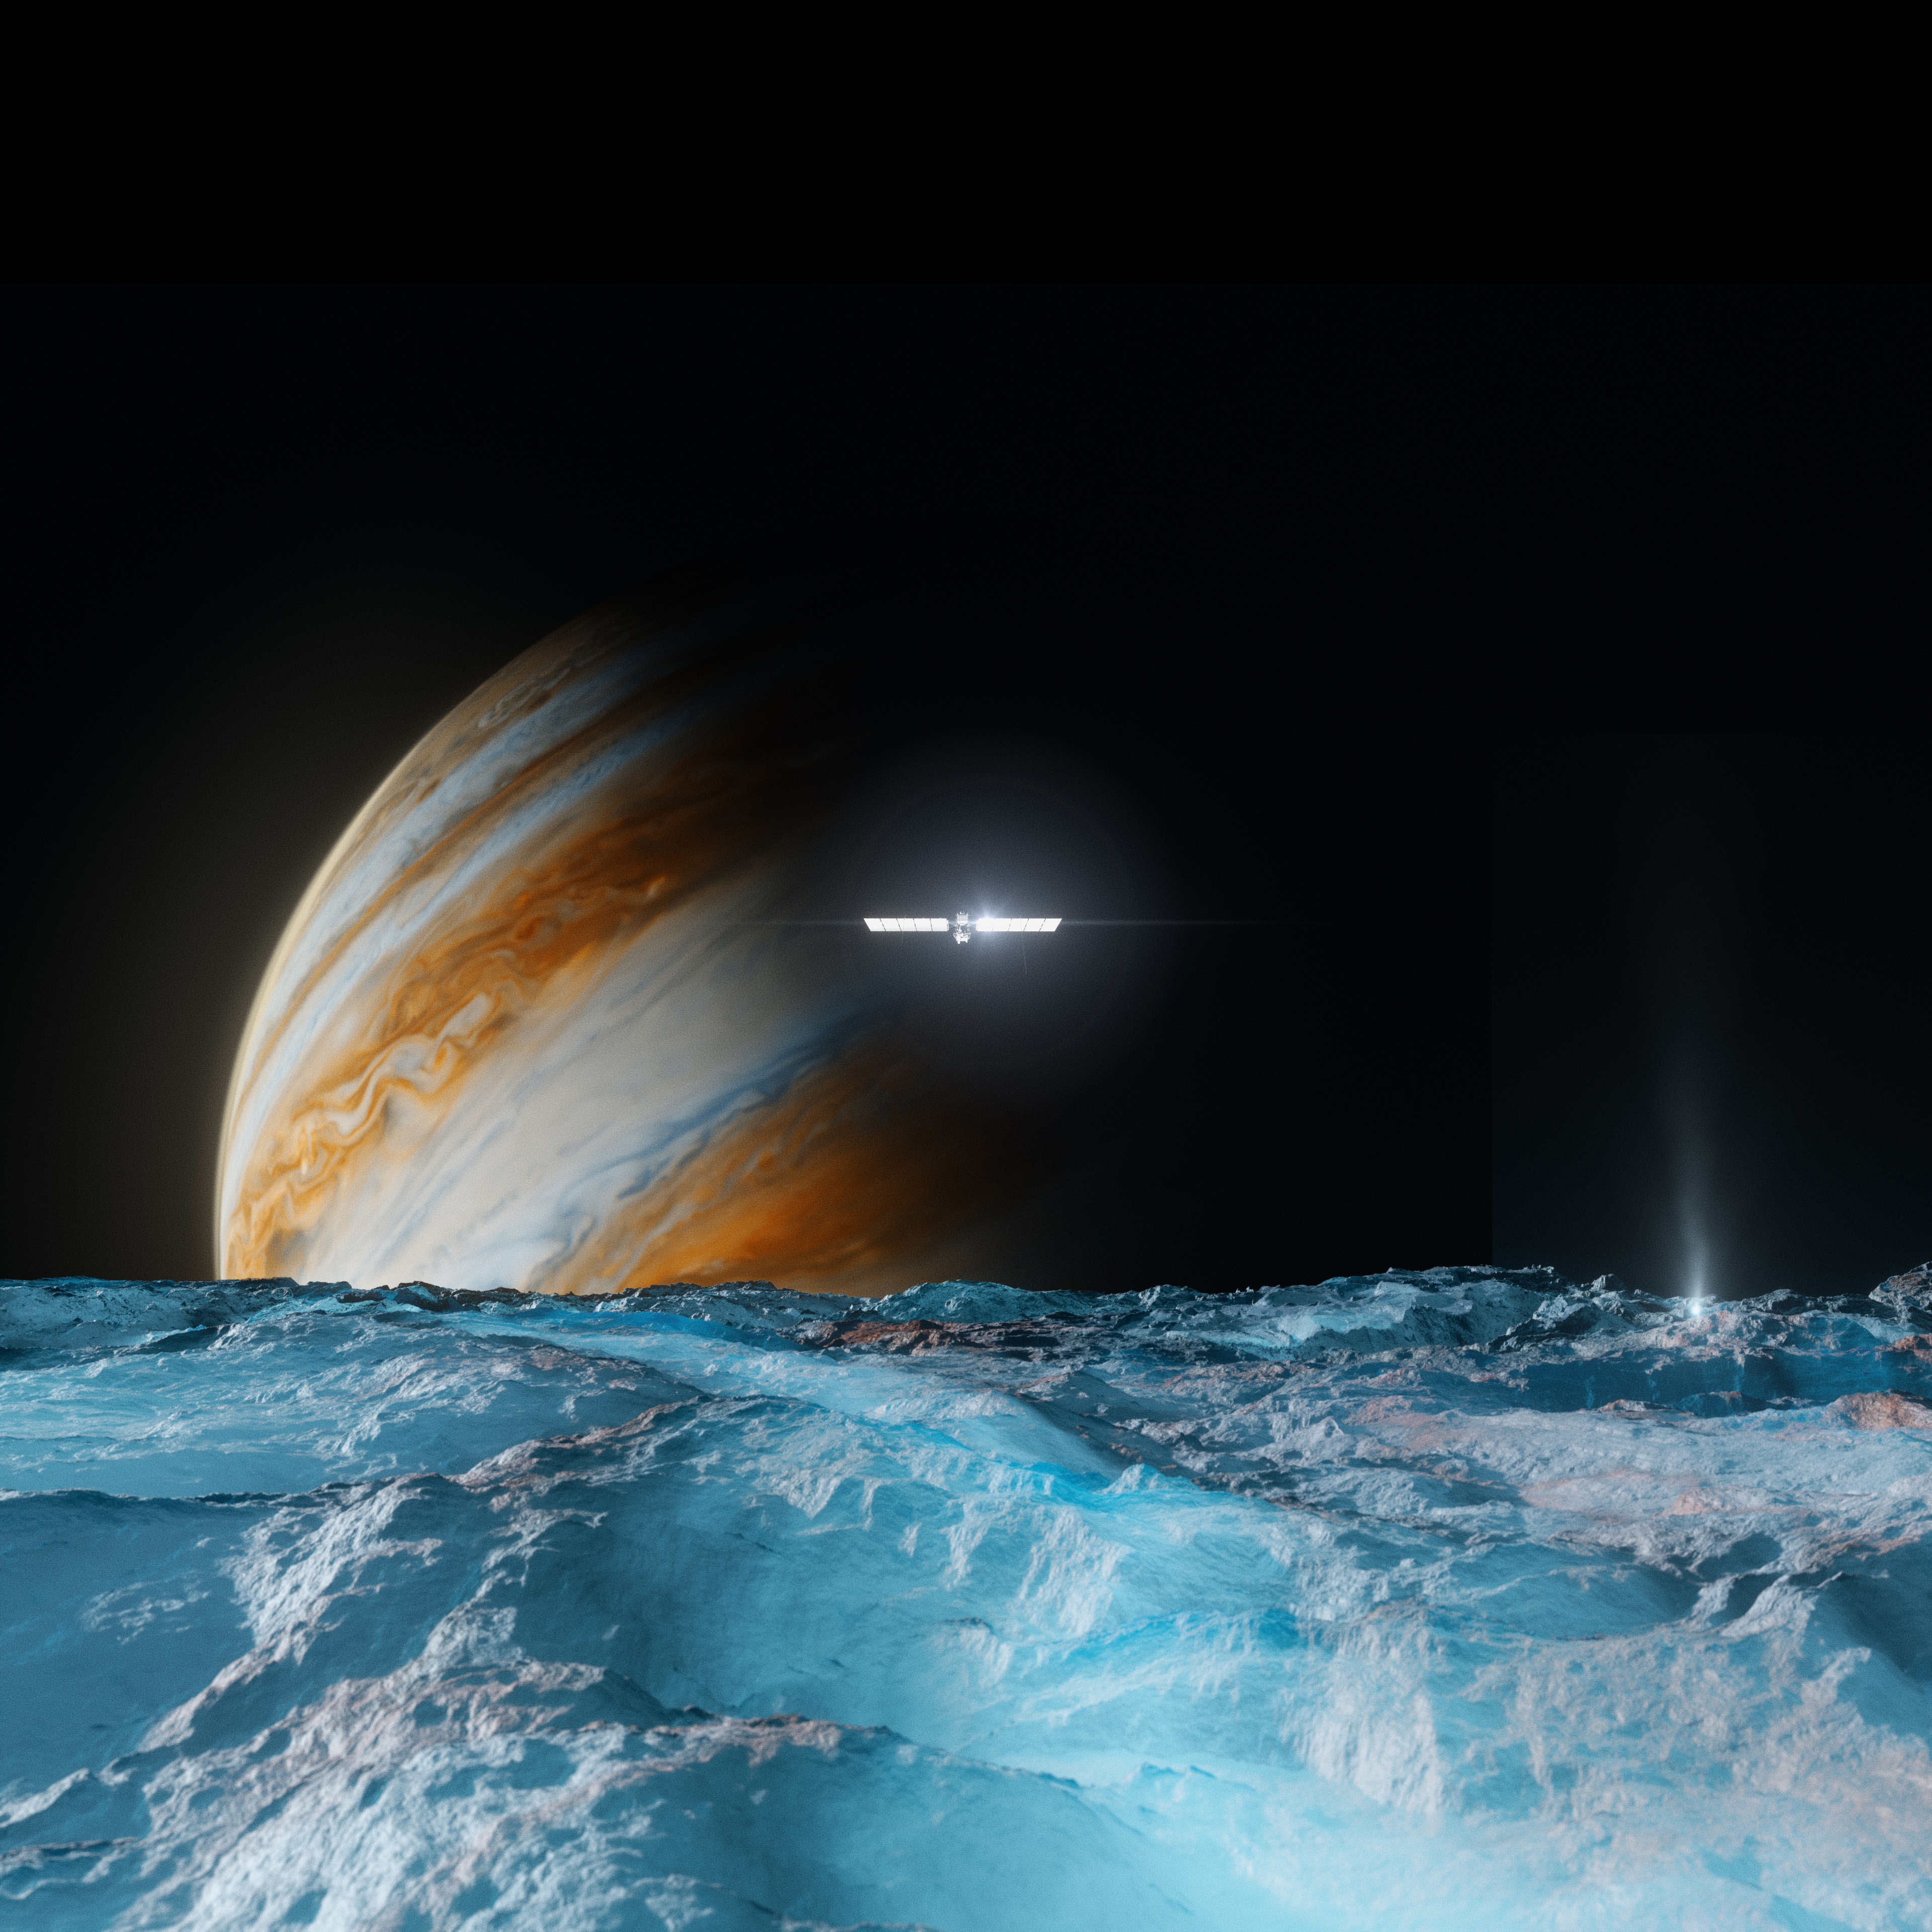 An icy surface is shown in the foreground, with the planet Jupiter and a shiny spacecraft looming in the background.